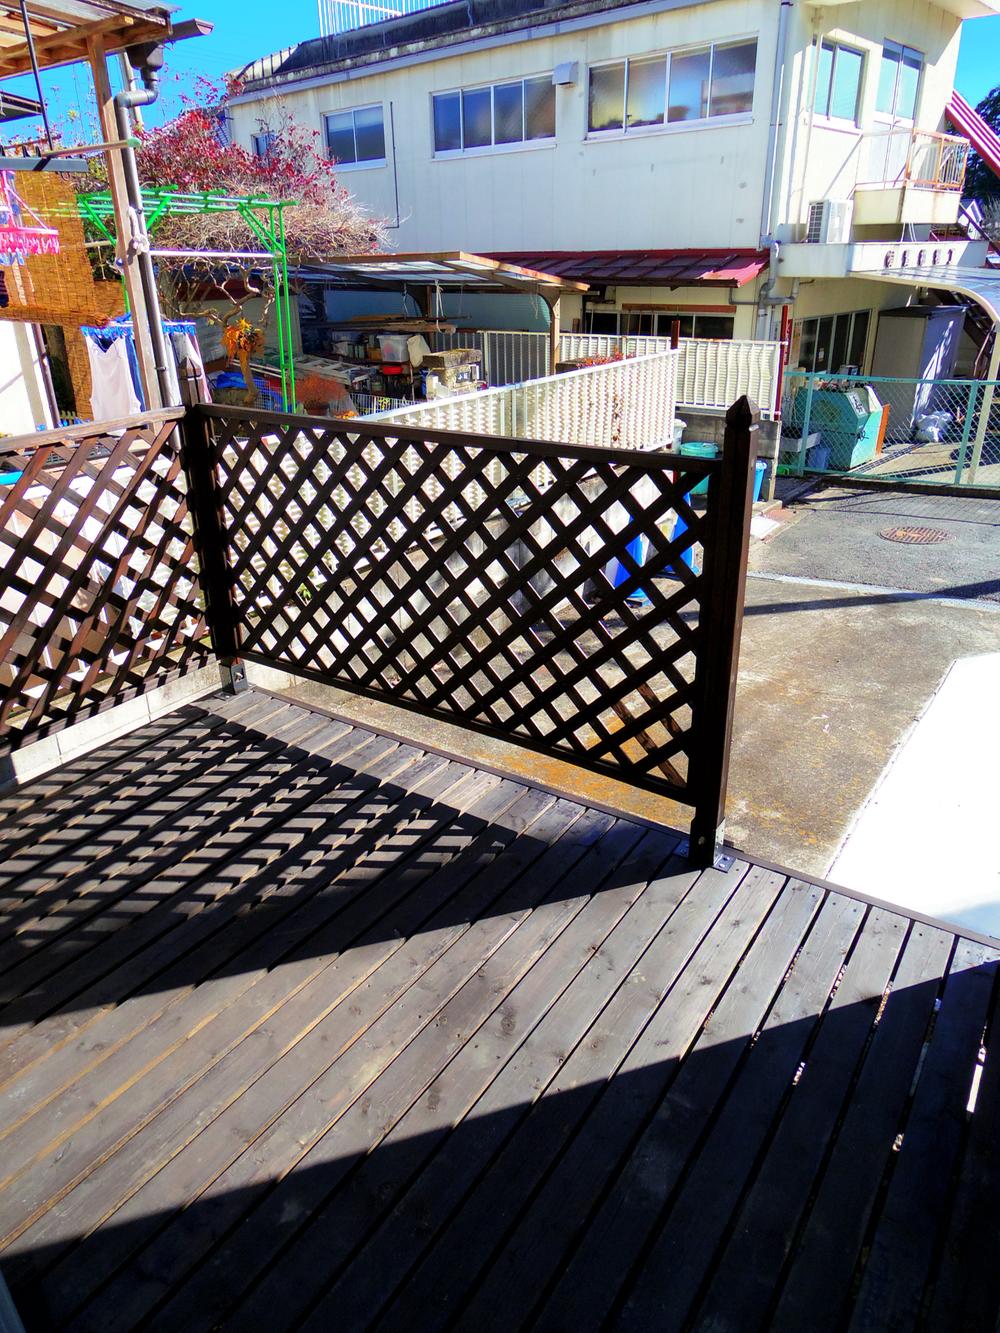 Other. It is a wood deck space as seen from the LDK.